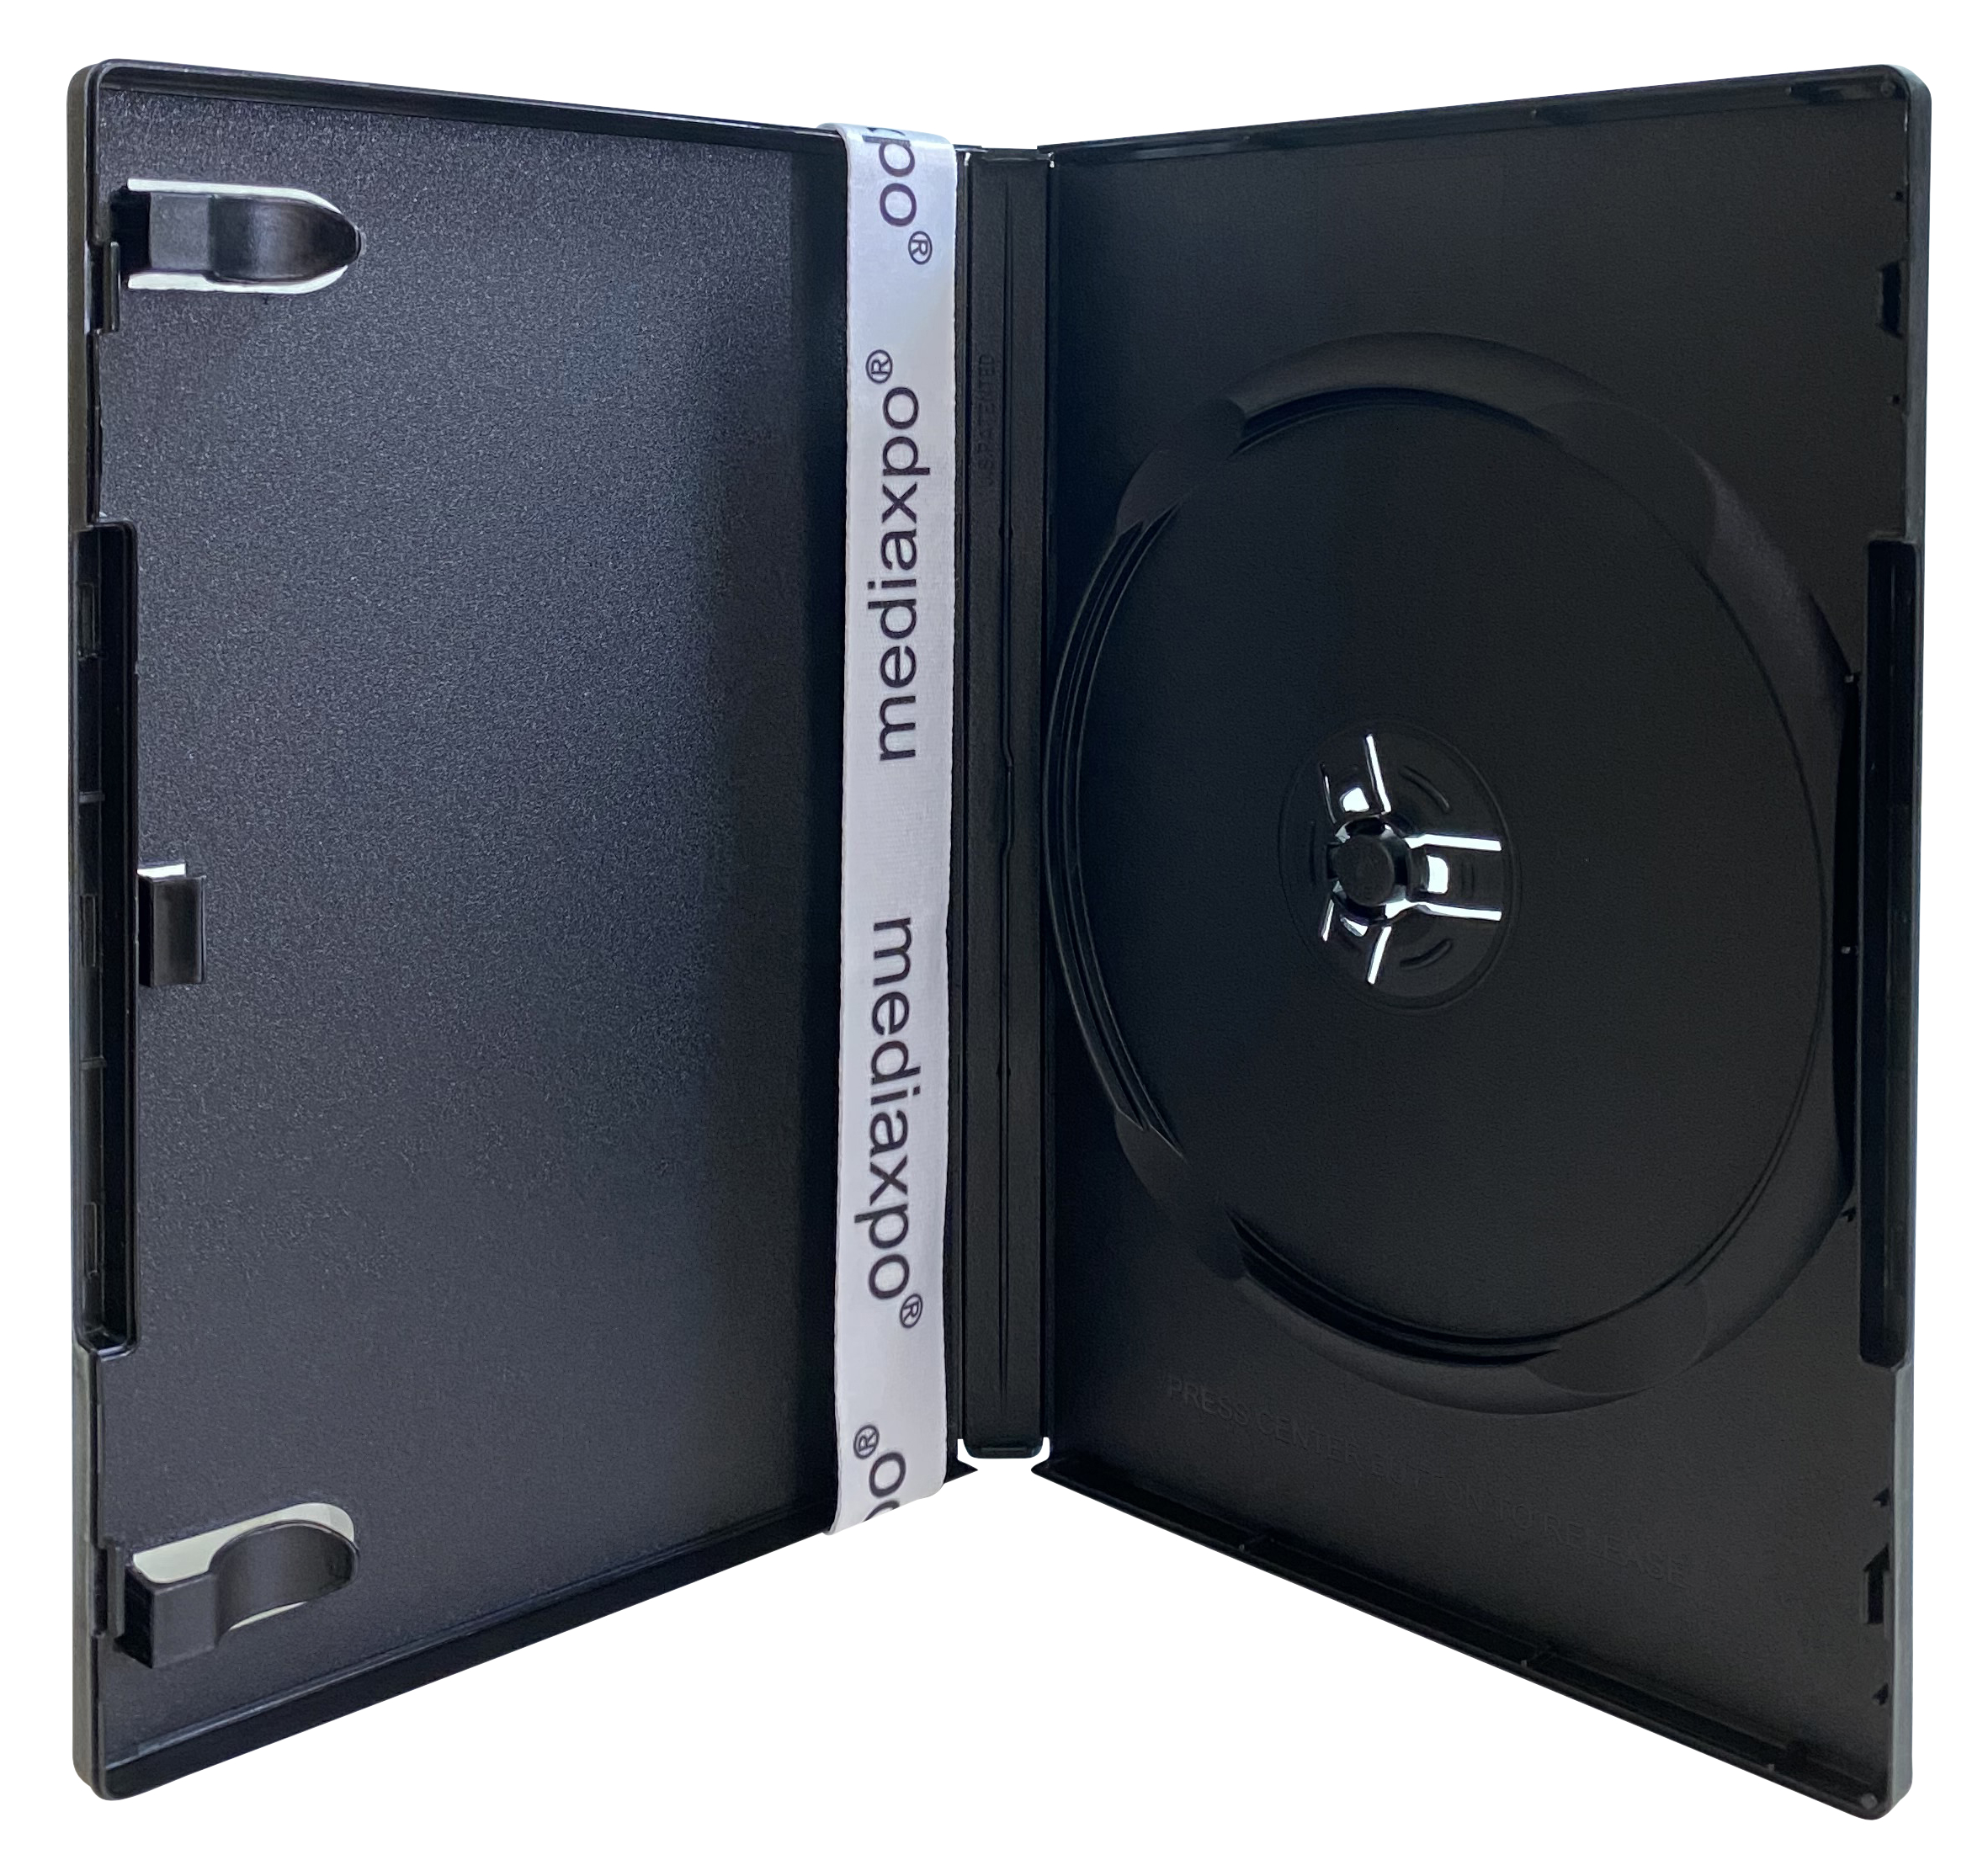 Image of ID 1214259181 200 PREMIUM STANDARD Black Single DVD Cases 14MM (100% New Material)